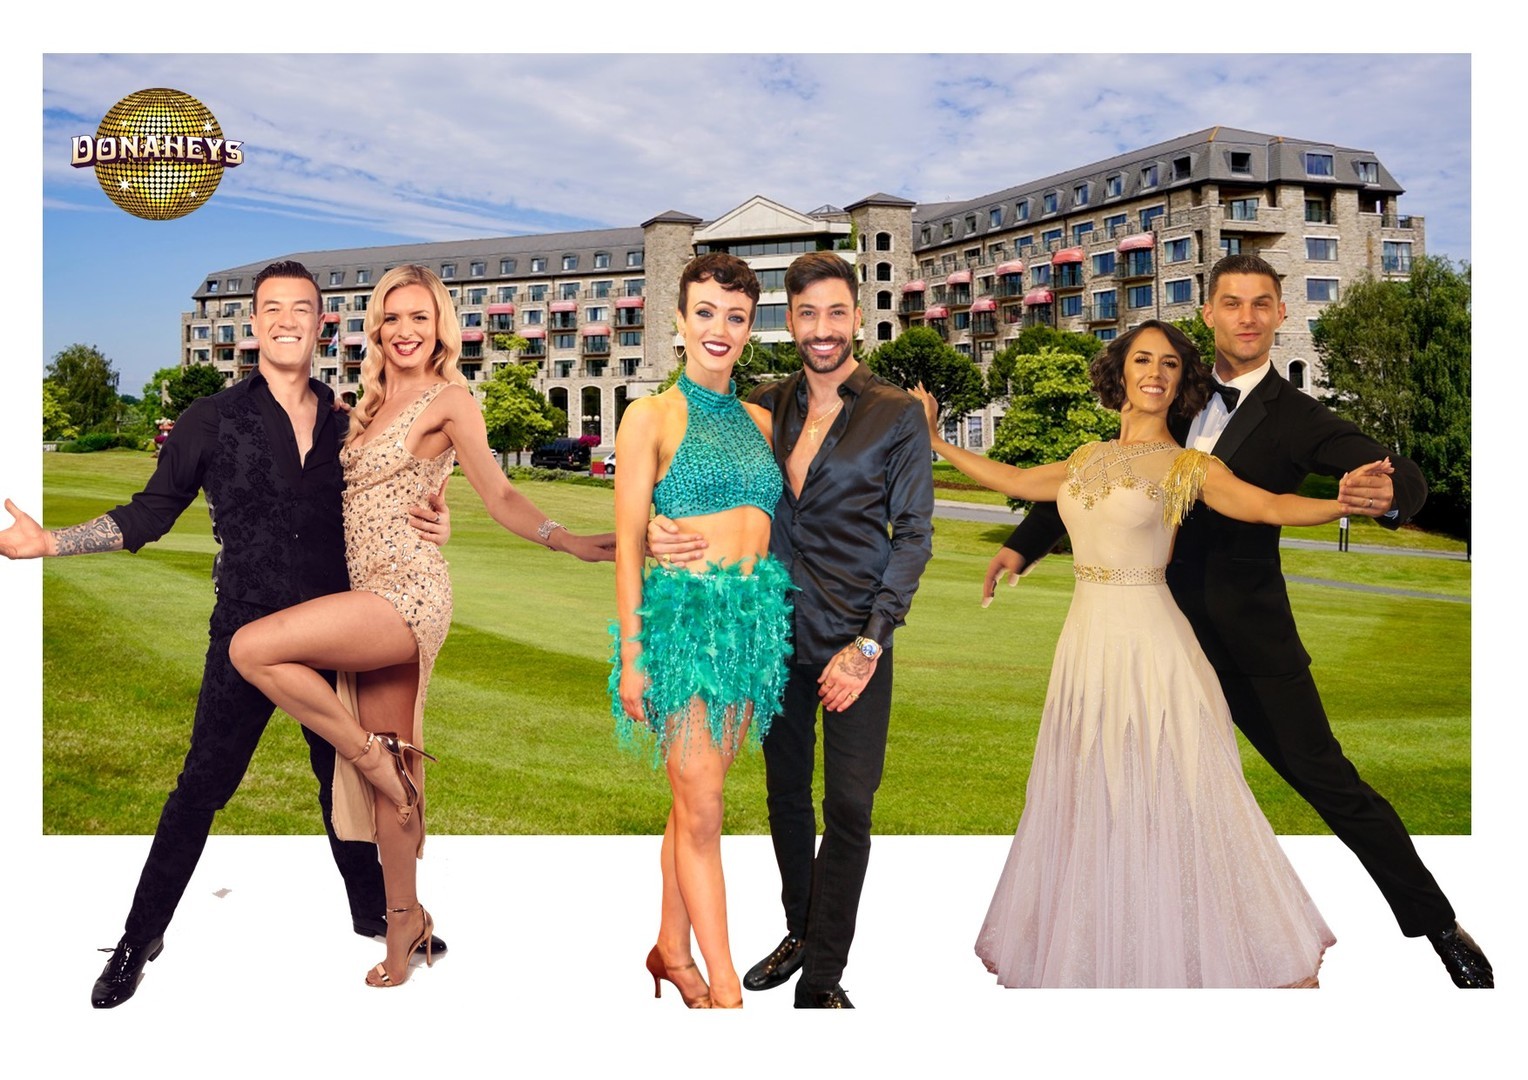 Donaheys Dancing With The Stars Weekend South Wales, July 2023, Newport, Wales, United Kingdom